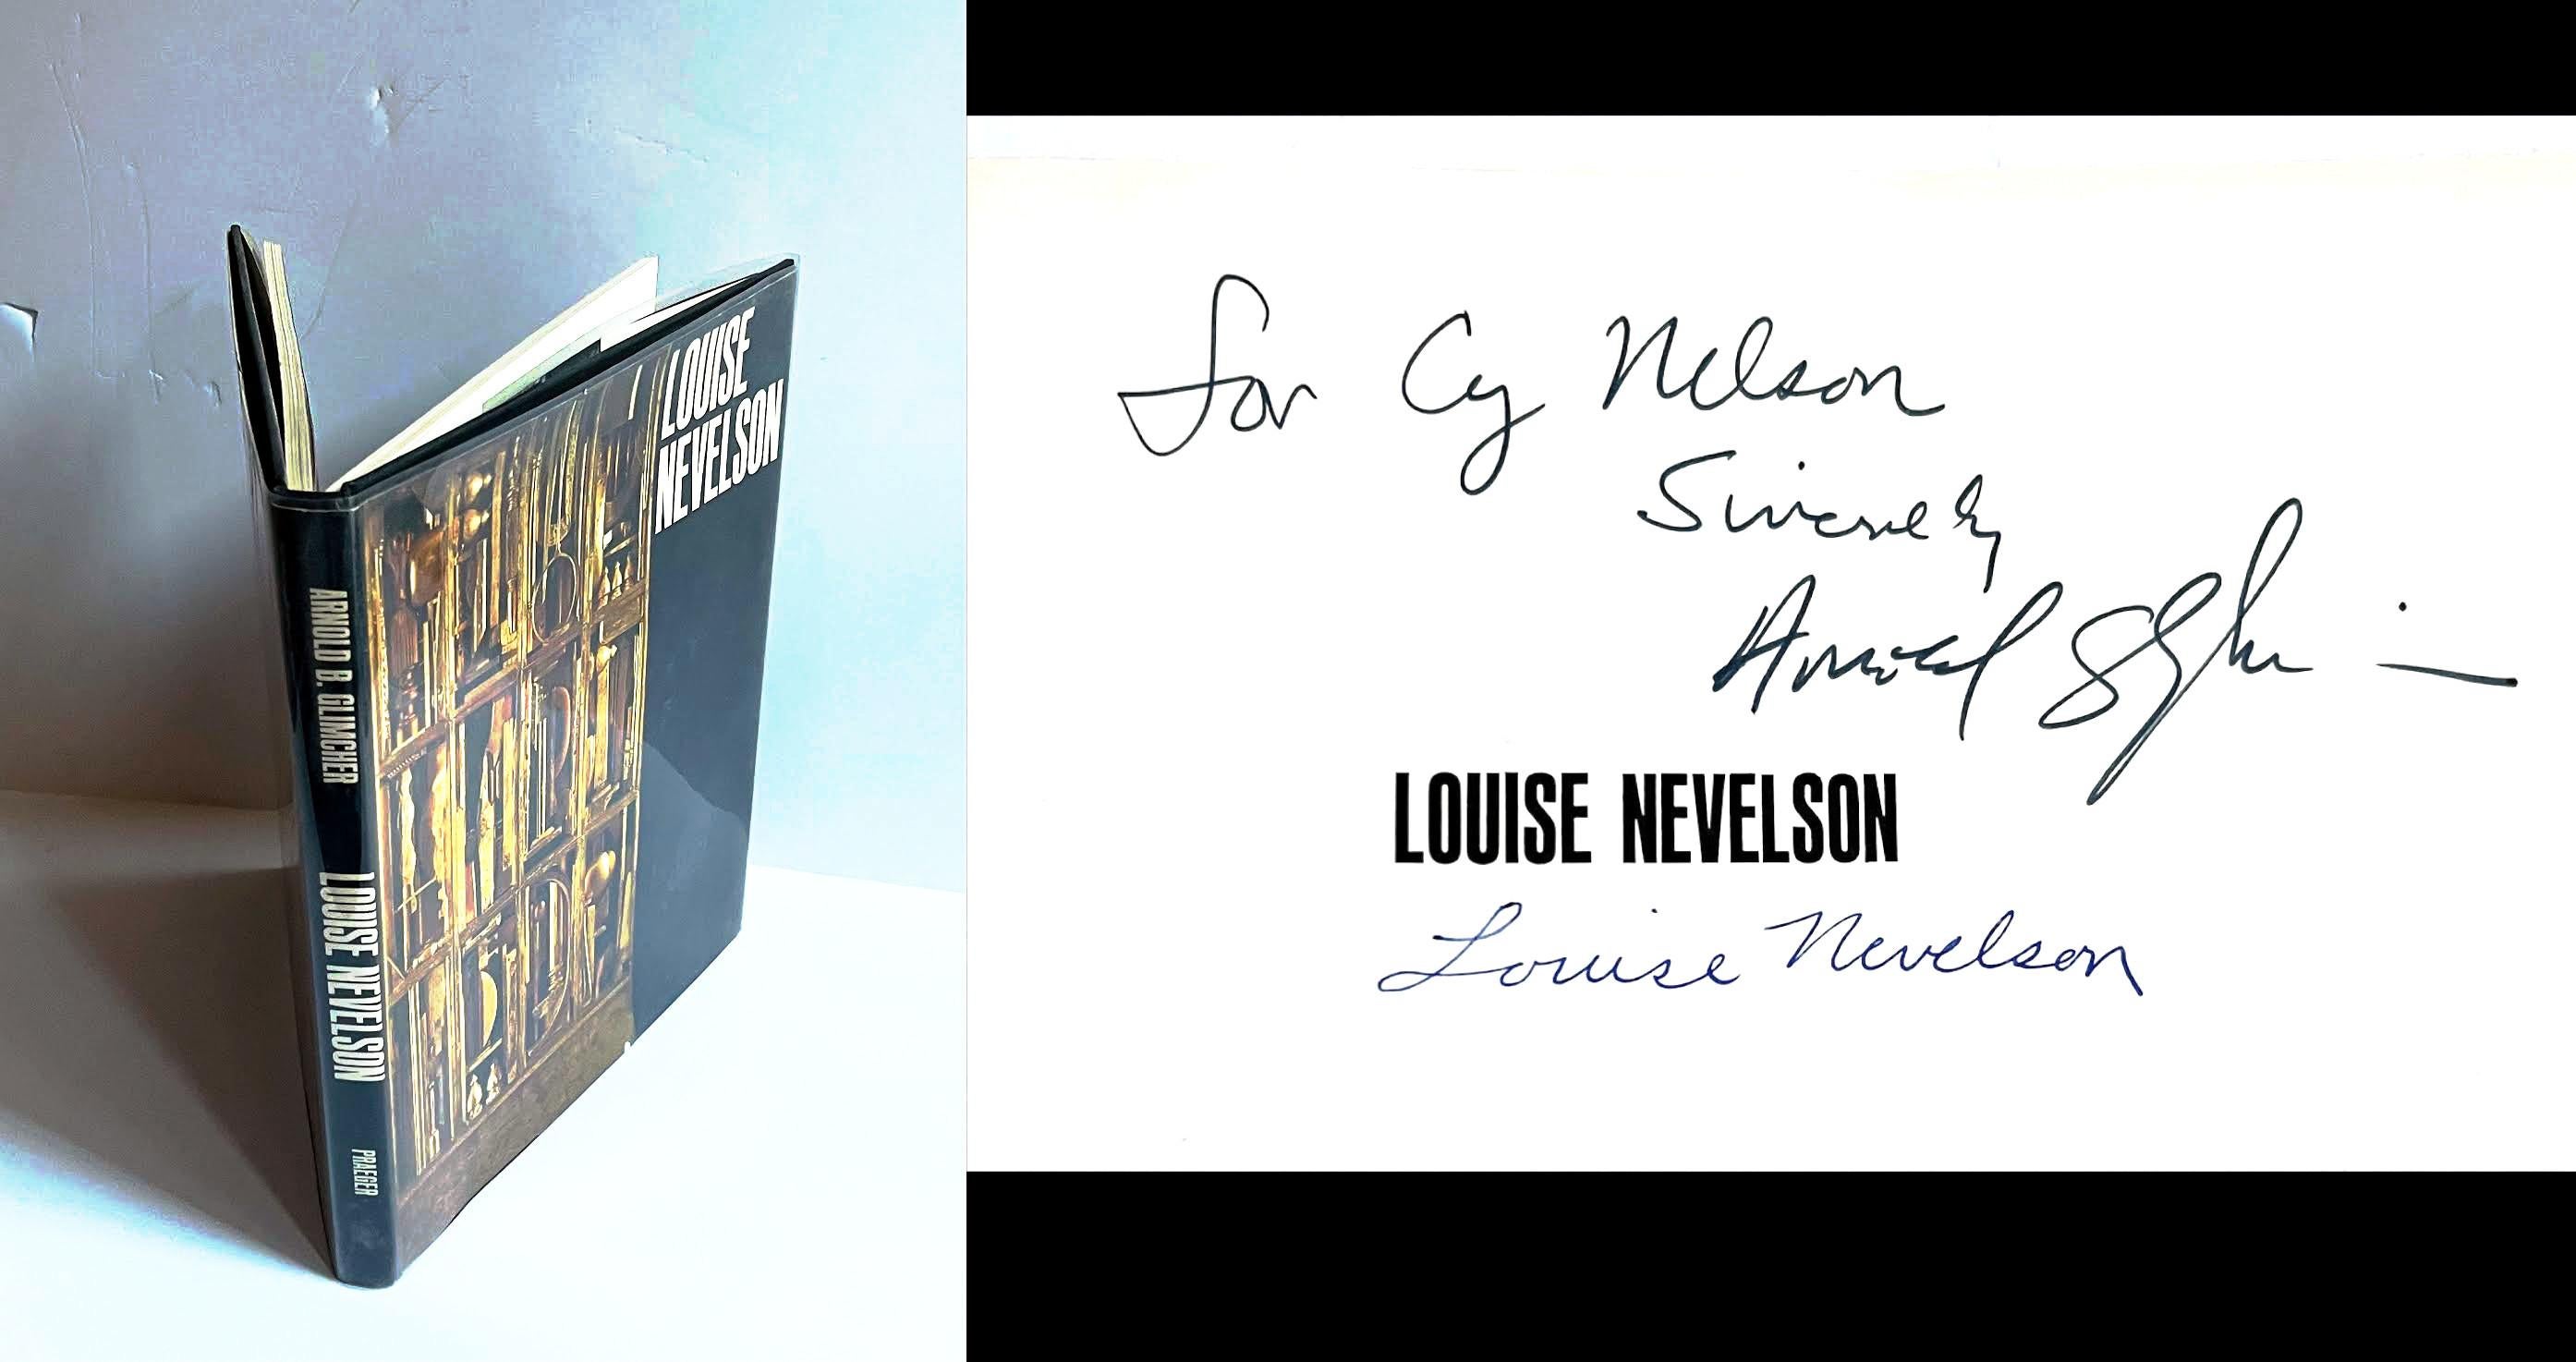 Louise Nevelson (Hand signed by BOTH the author, Arne Glimcher (founder of PACE gallery) and artist Louise Nevelson, and inscribed to Cy Nelson), 1972
Hardback monograph with dust jacket (Hand signed by BOTH the author, Arne Glimcher (founder of